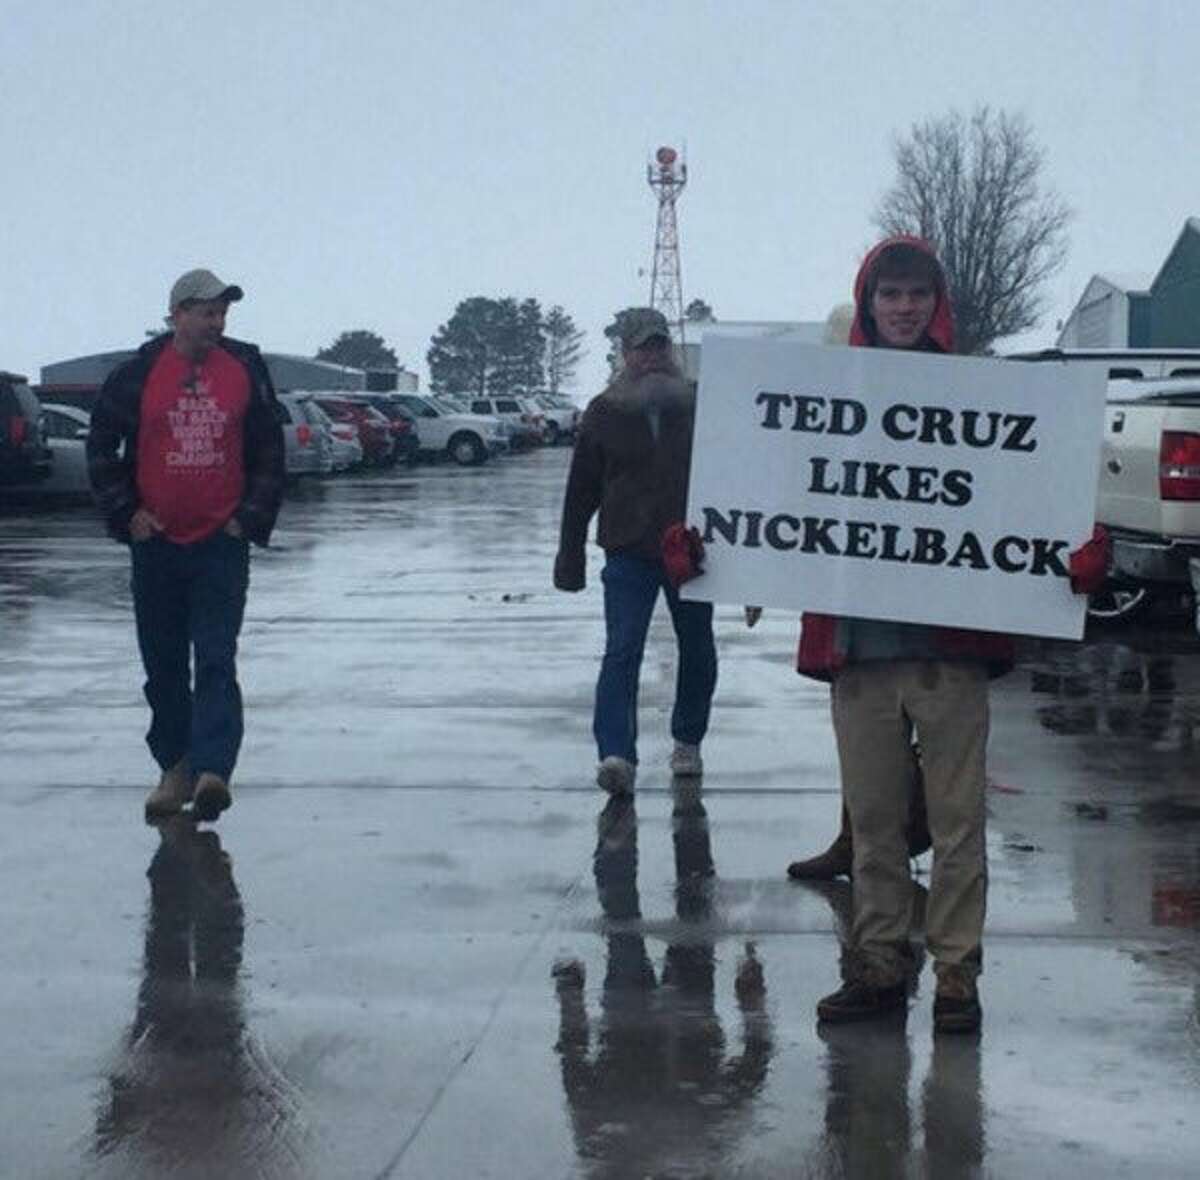 Nickelback tweeted this photo of the protester.